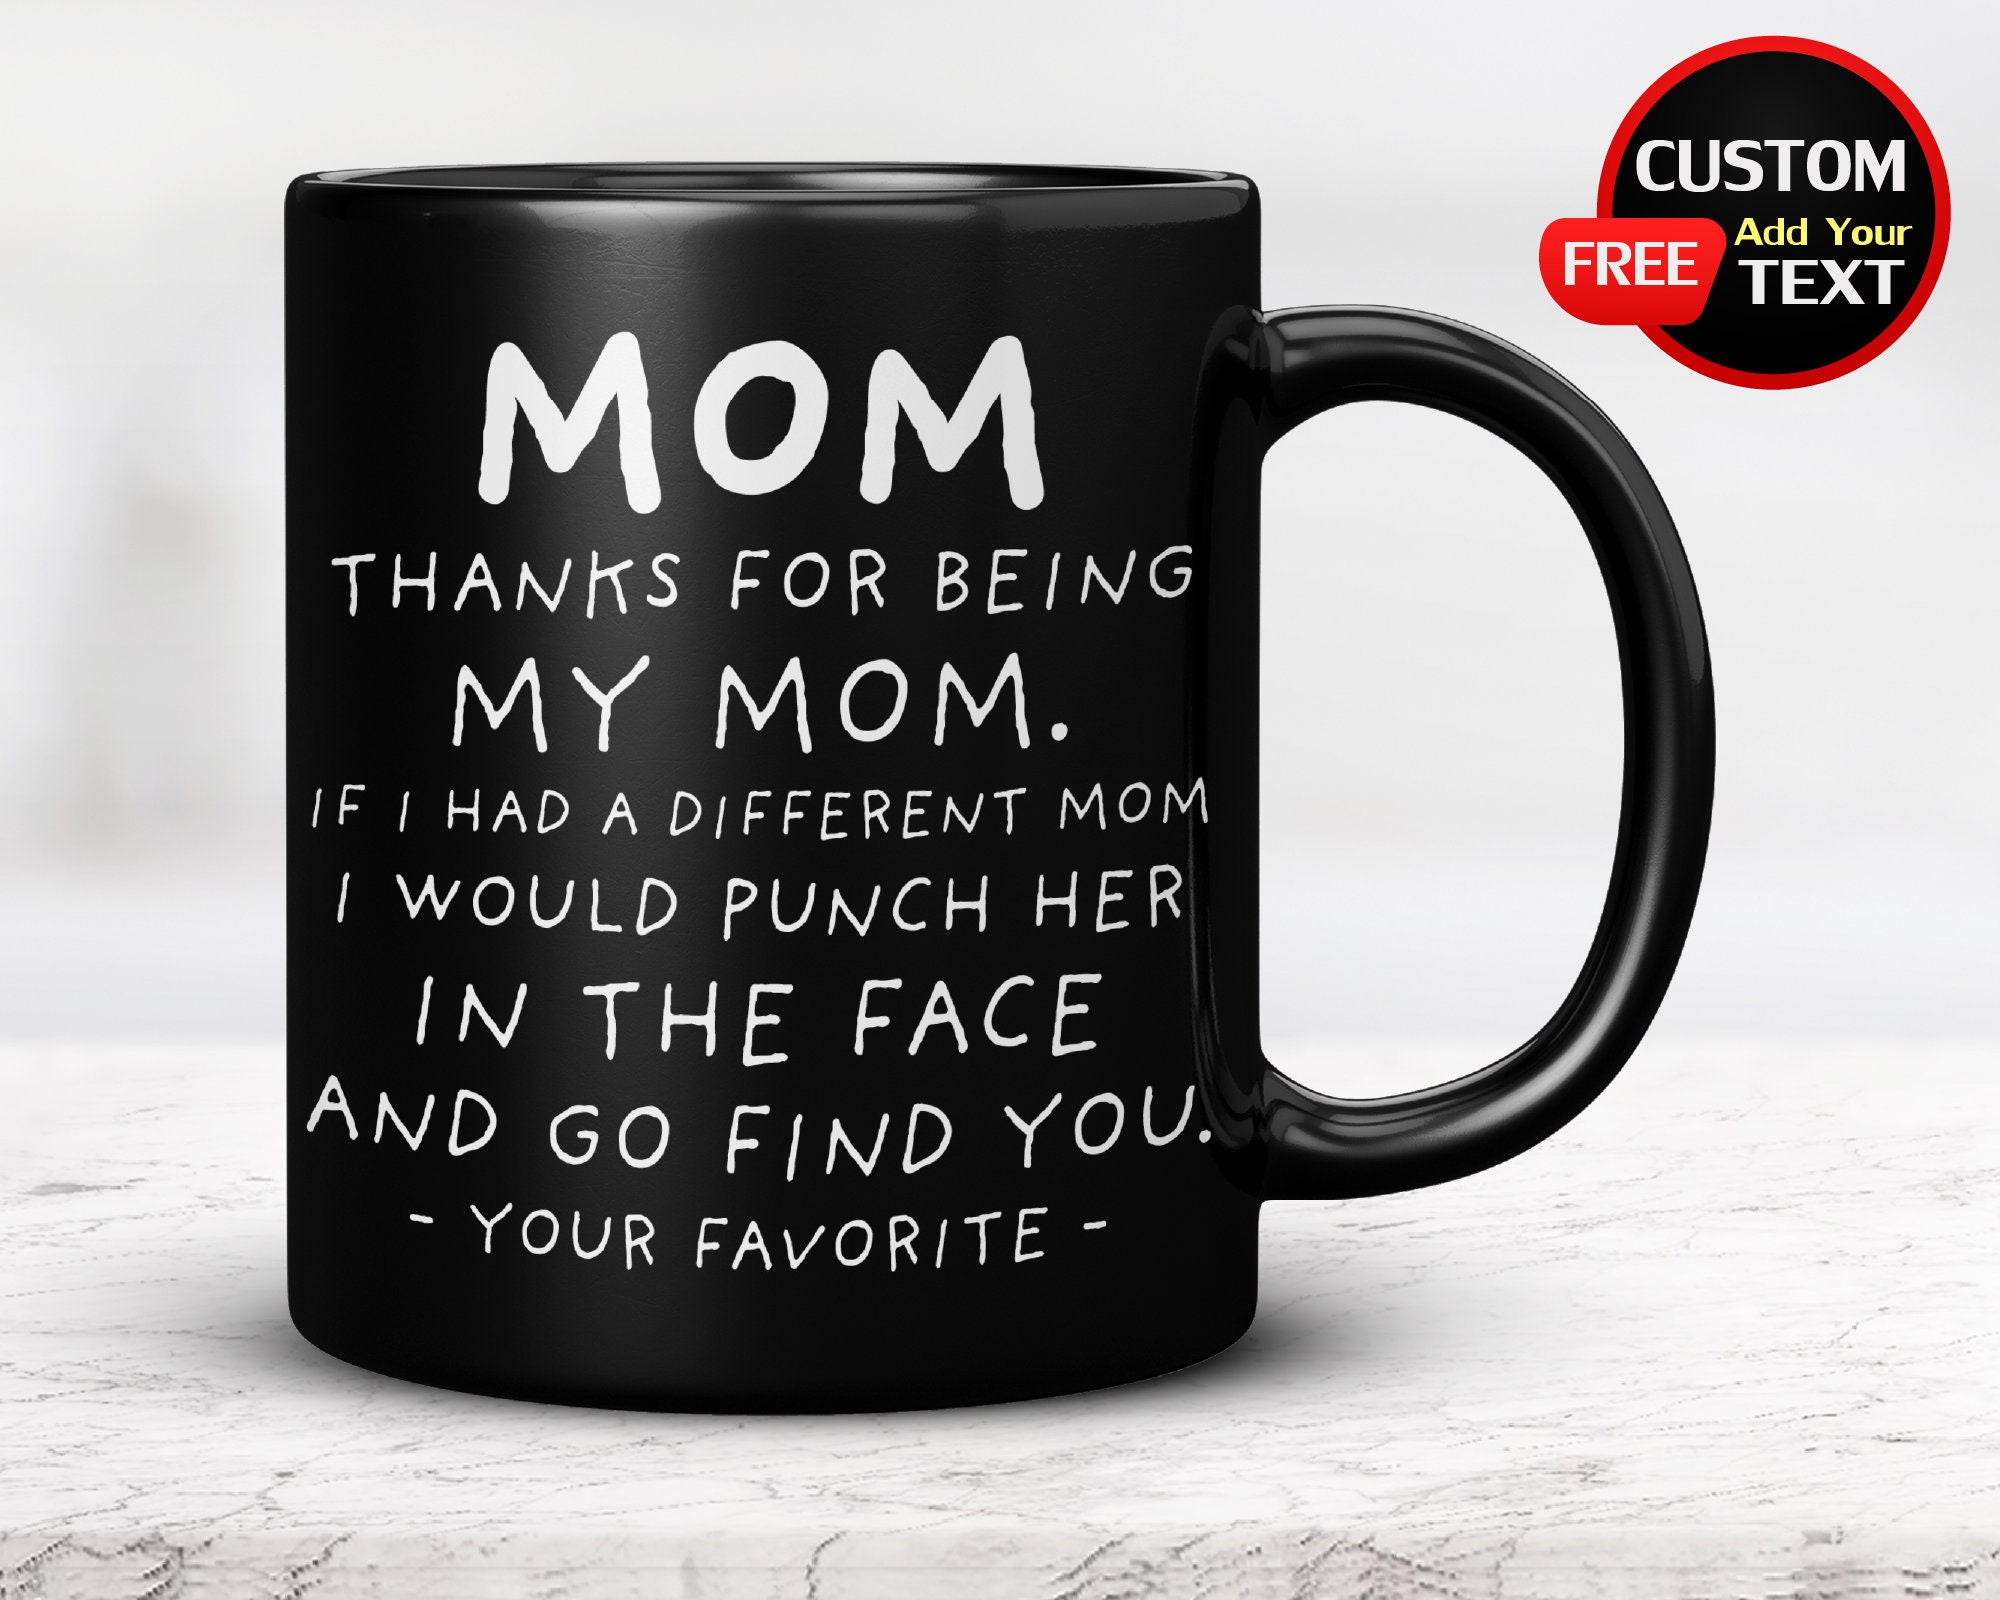  Funny Mom Gift - I'd Punch Another Mom In The Face Coffee Mug - Gag  Gift Cup From Your Favorite Child + Sticker : Home & Kitchen